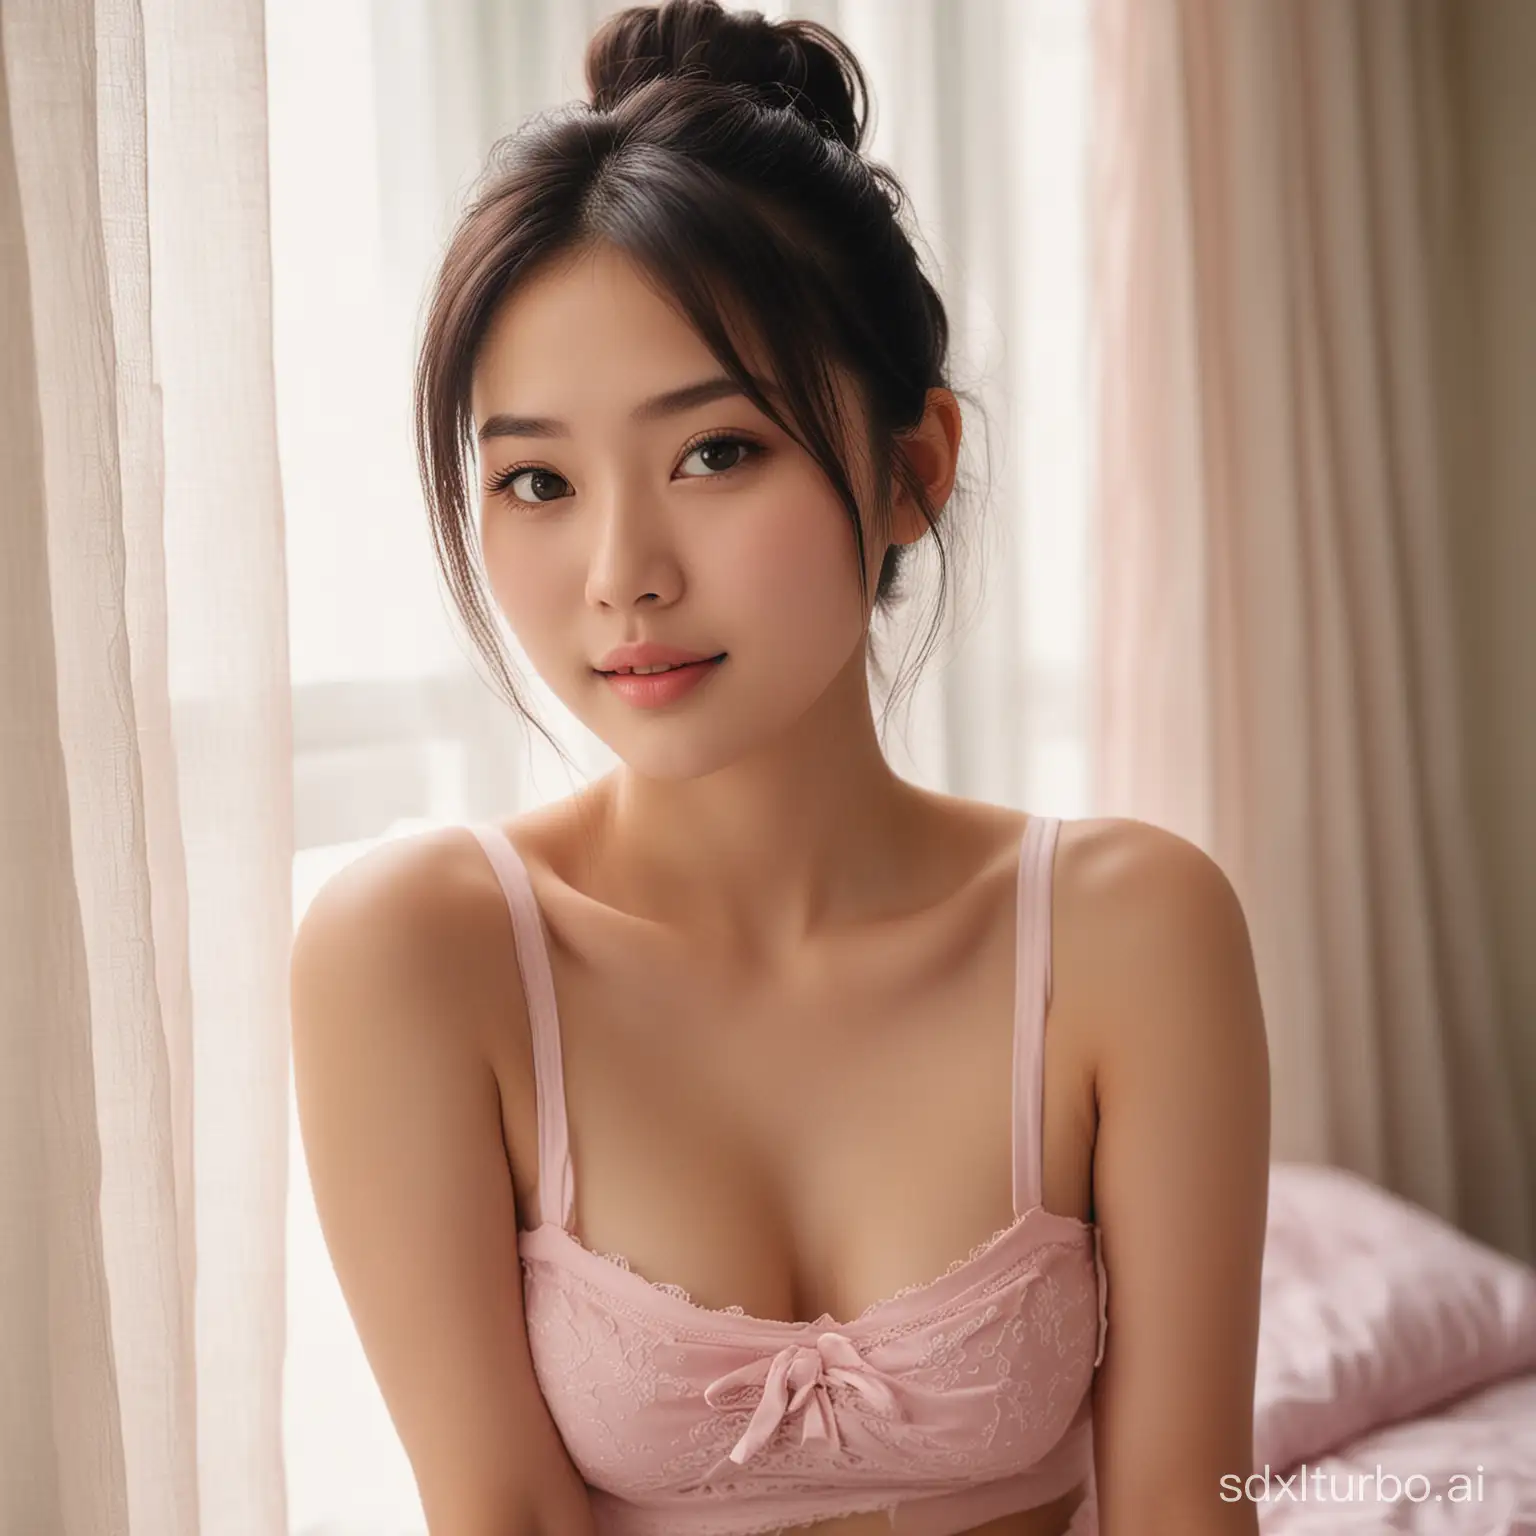 A delightful 20-year-old Asian girl with a petite frame and a small chest, exposing one shoulder in a carefree and alluring manner. Her delicate skin has a pale, almost porcelain-like complexion that accentuates her rosy cheeks and dark eyes. She has straight black hair that cascades down her back, framing her face in a perfect messy bun. She wears a light pink cotton tank top that hugs her slender torso, showing off her youthful curves. Her pink bottoms, which appear to be a combination of shorts and boyshorts, sit low on her hips, revealing a hint of her toned thighs. The room she's in is dimly lit, adding to the cozy and intimate atmosphere, while a soft, warm light filters through the sheer curtains behind her, casting a dreamy glow across her features. The girl in the image exudes an endearing charm and innocence, making her appearance both cute and captivating.